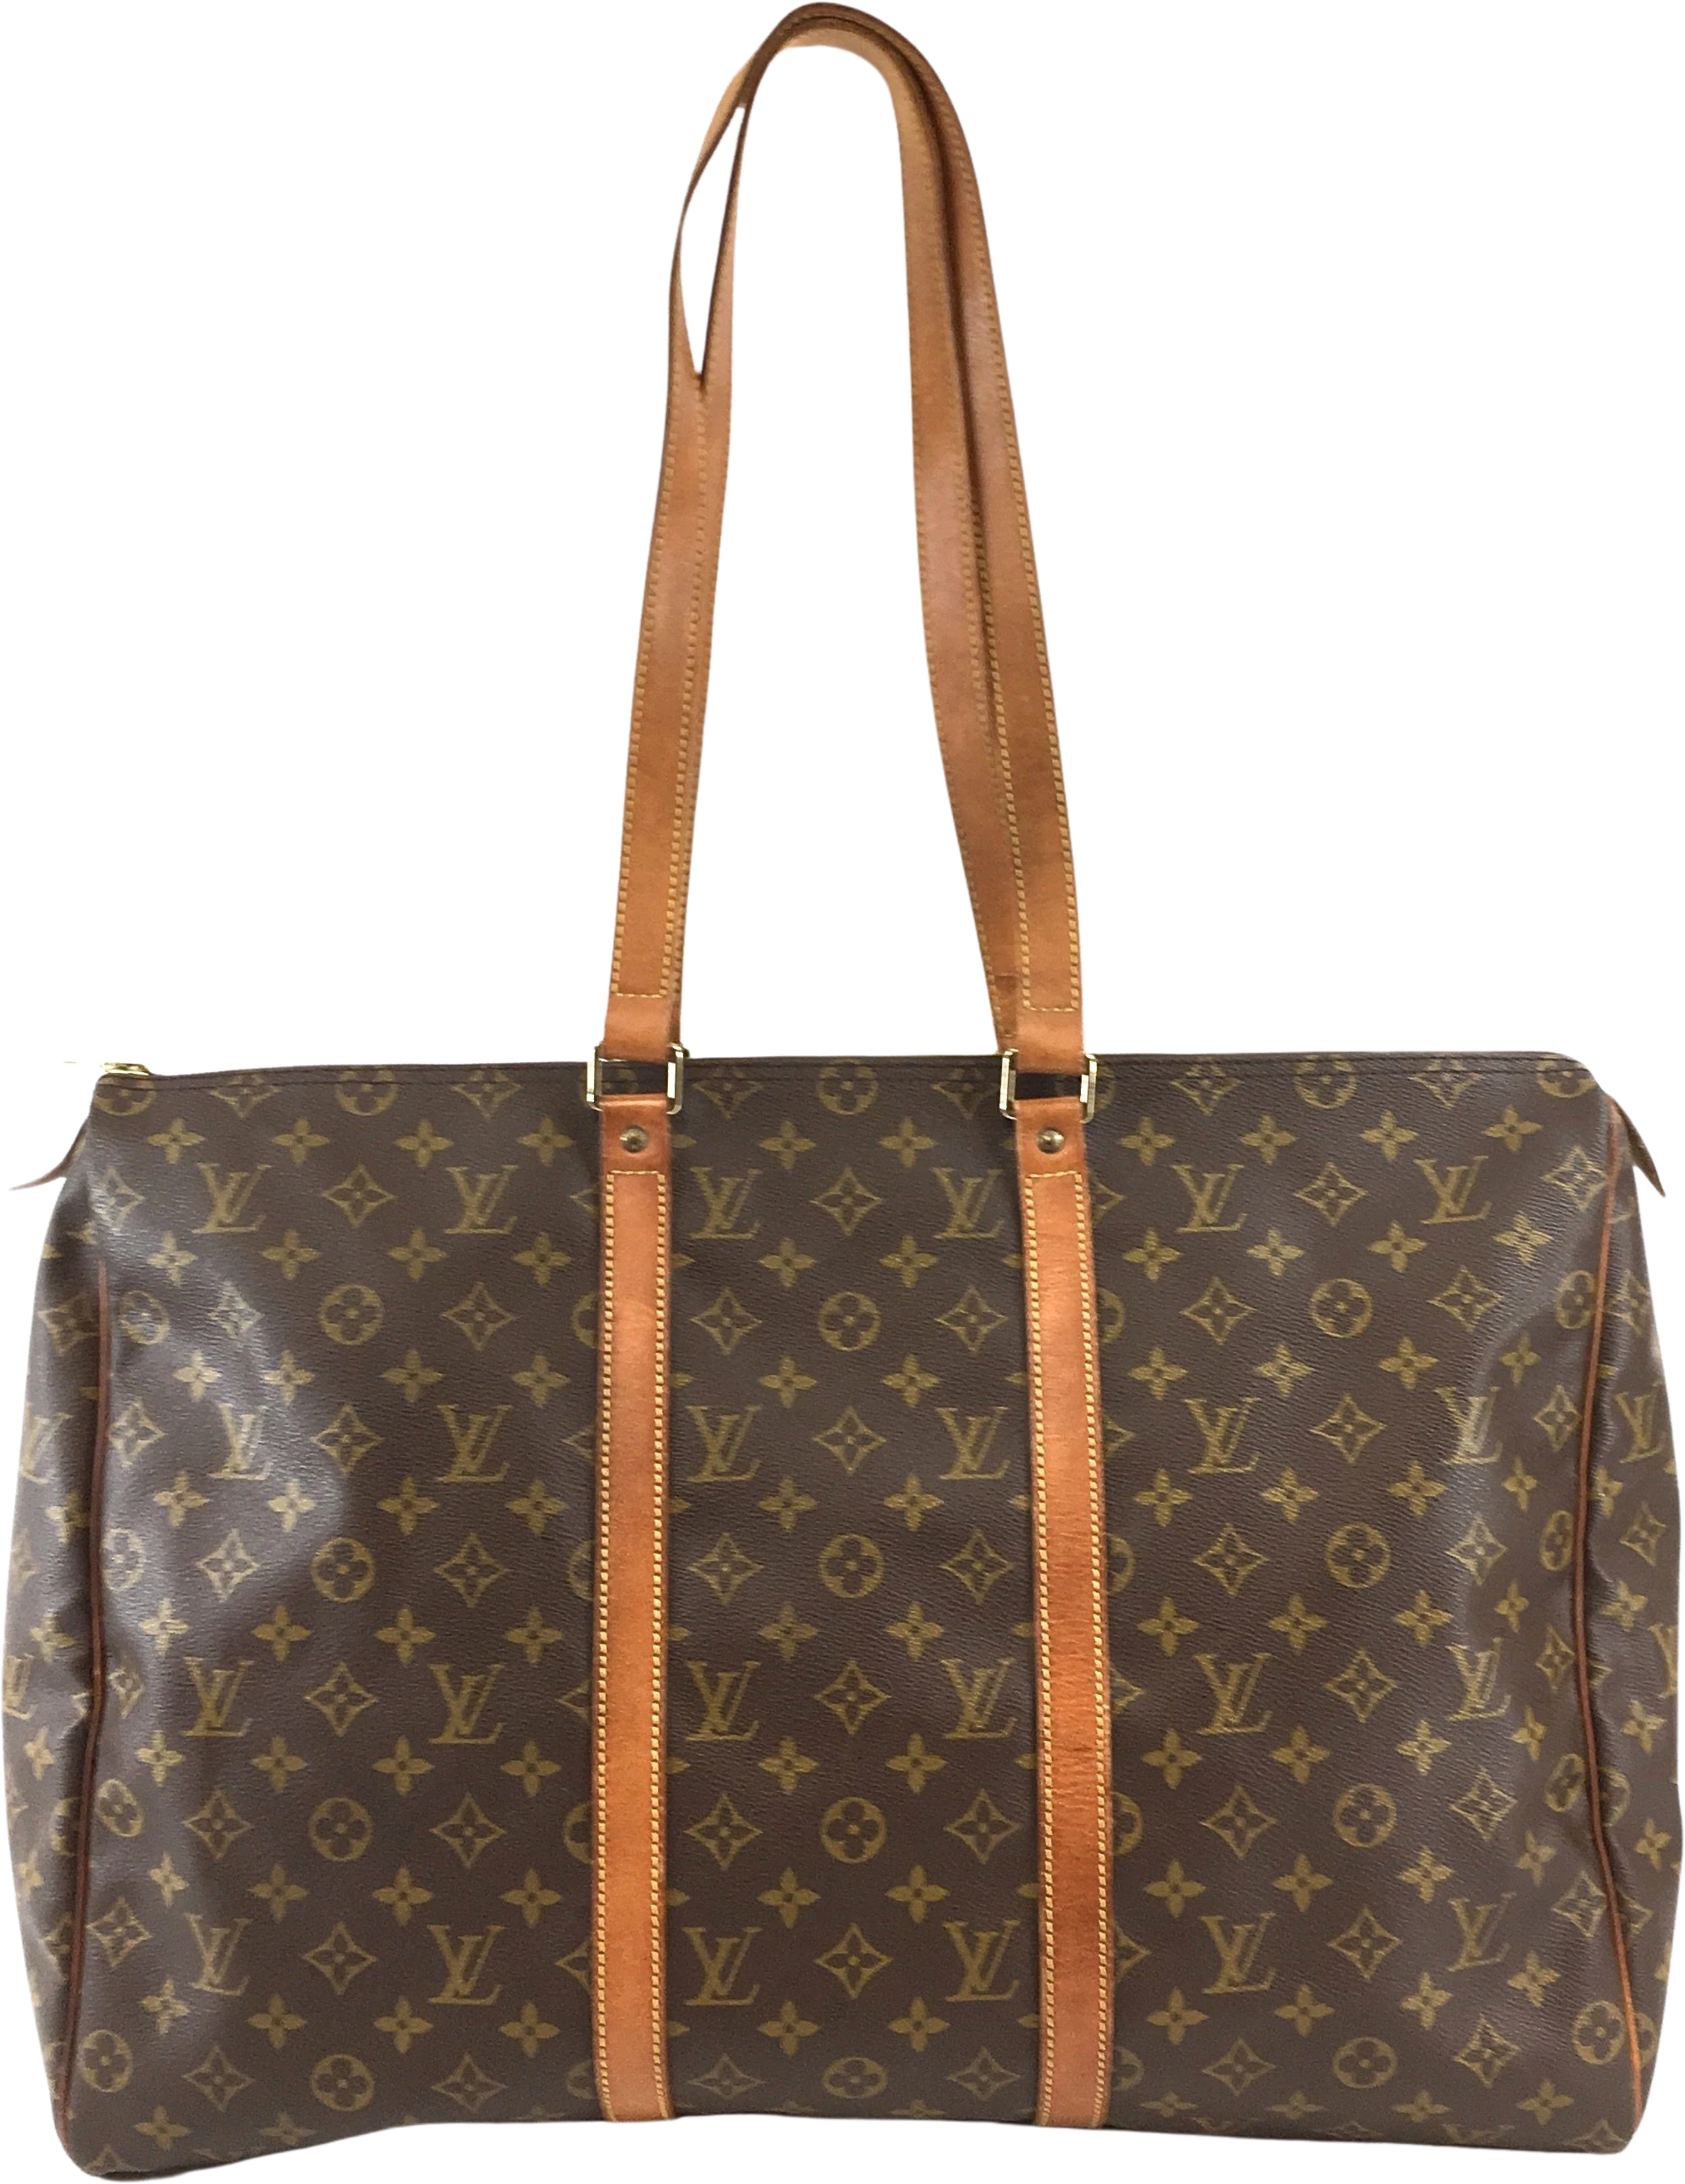 louis vuitton tote with zipper top